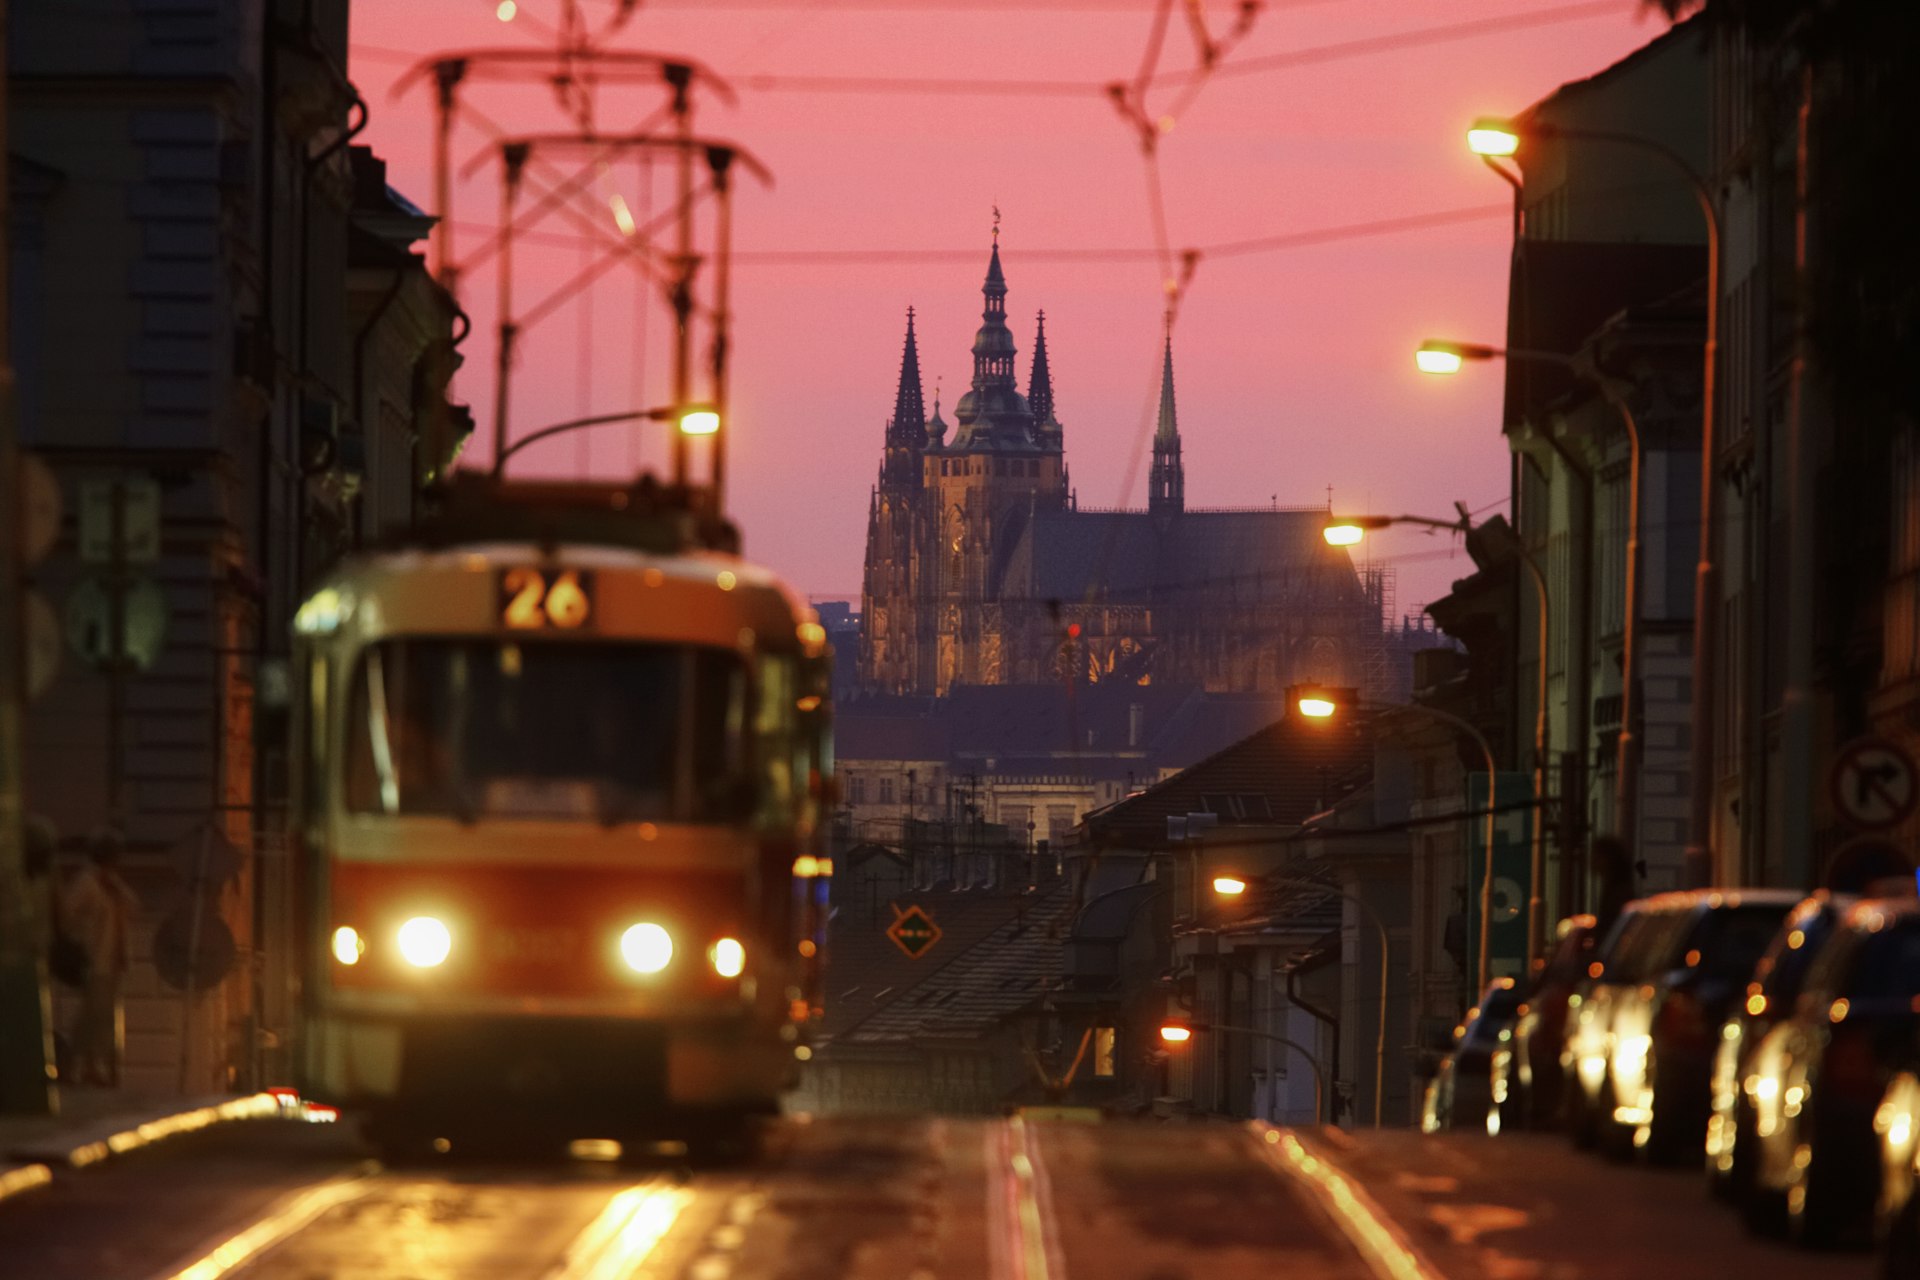 A tram runs along a street at dusk. A huge multi-spired church building is silhouetted in the distance